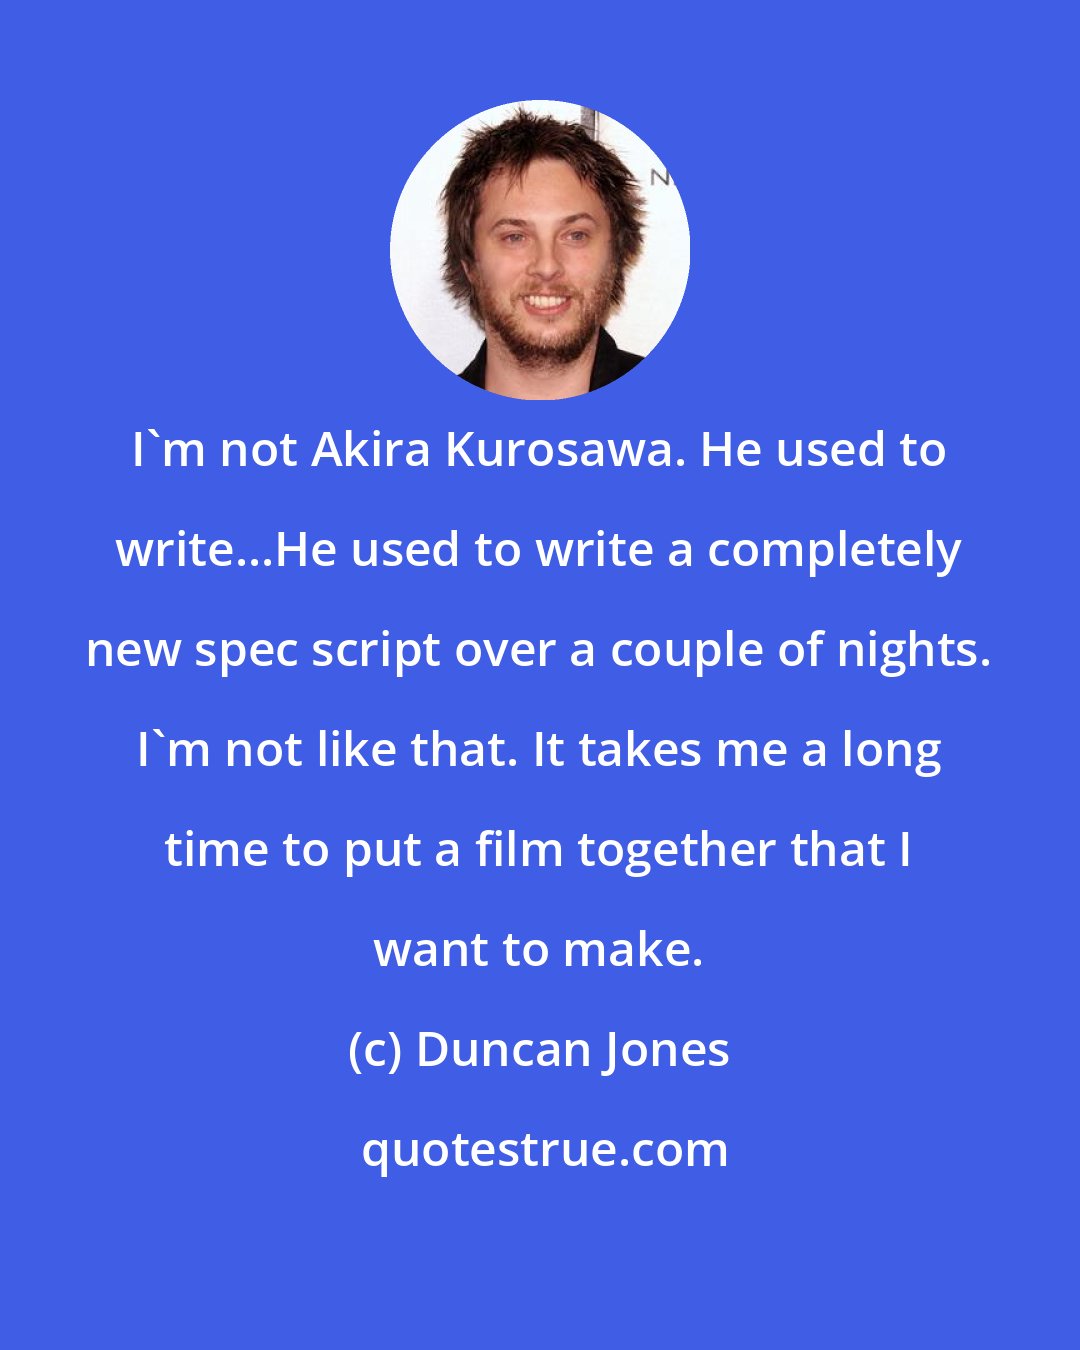 Duncan Jones: I'm not Akira Kurosawa. He used to write...He used to write a completely new spec script over a couple of nights. I'm not like that. It takes me a long time to put a film together that I want to make.